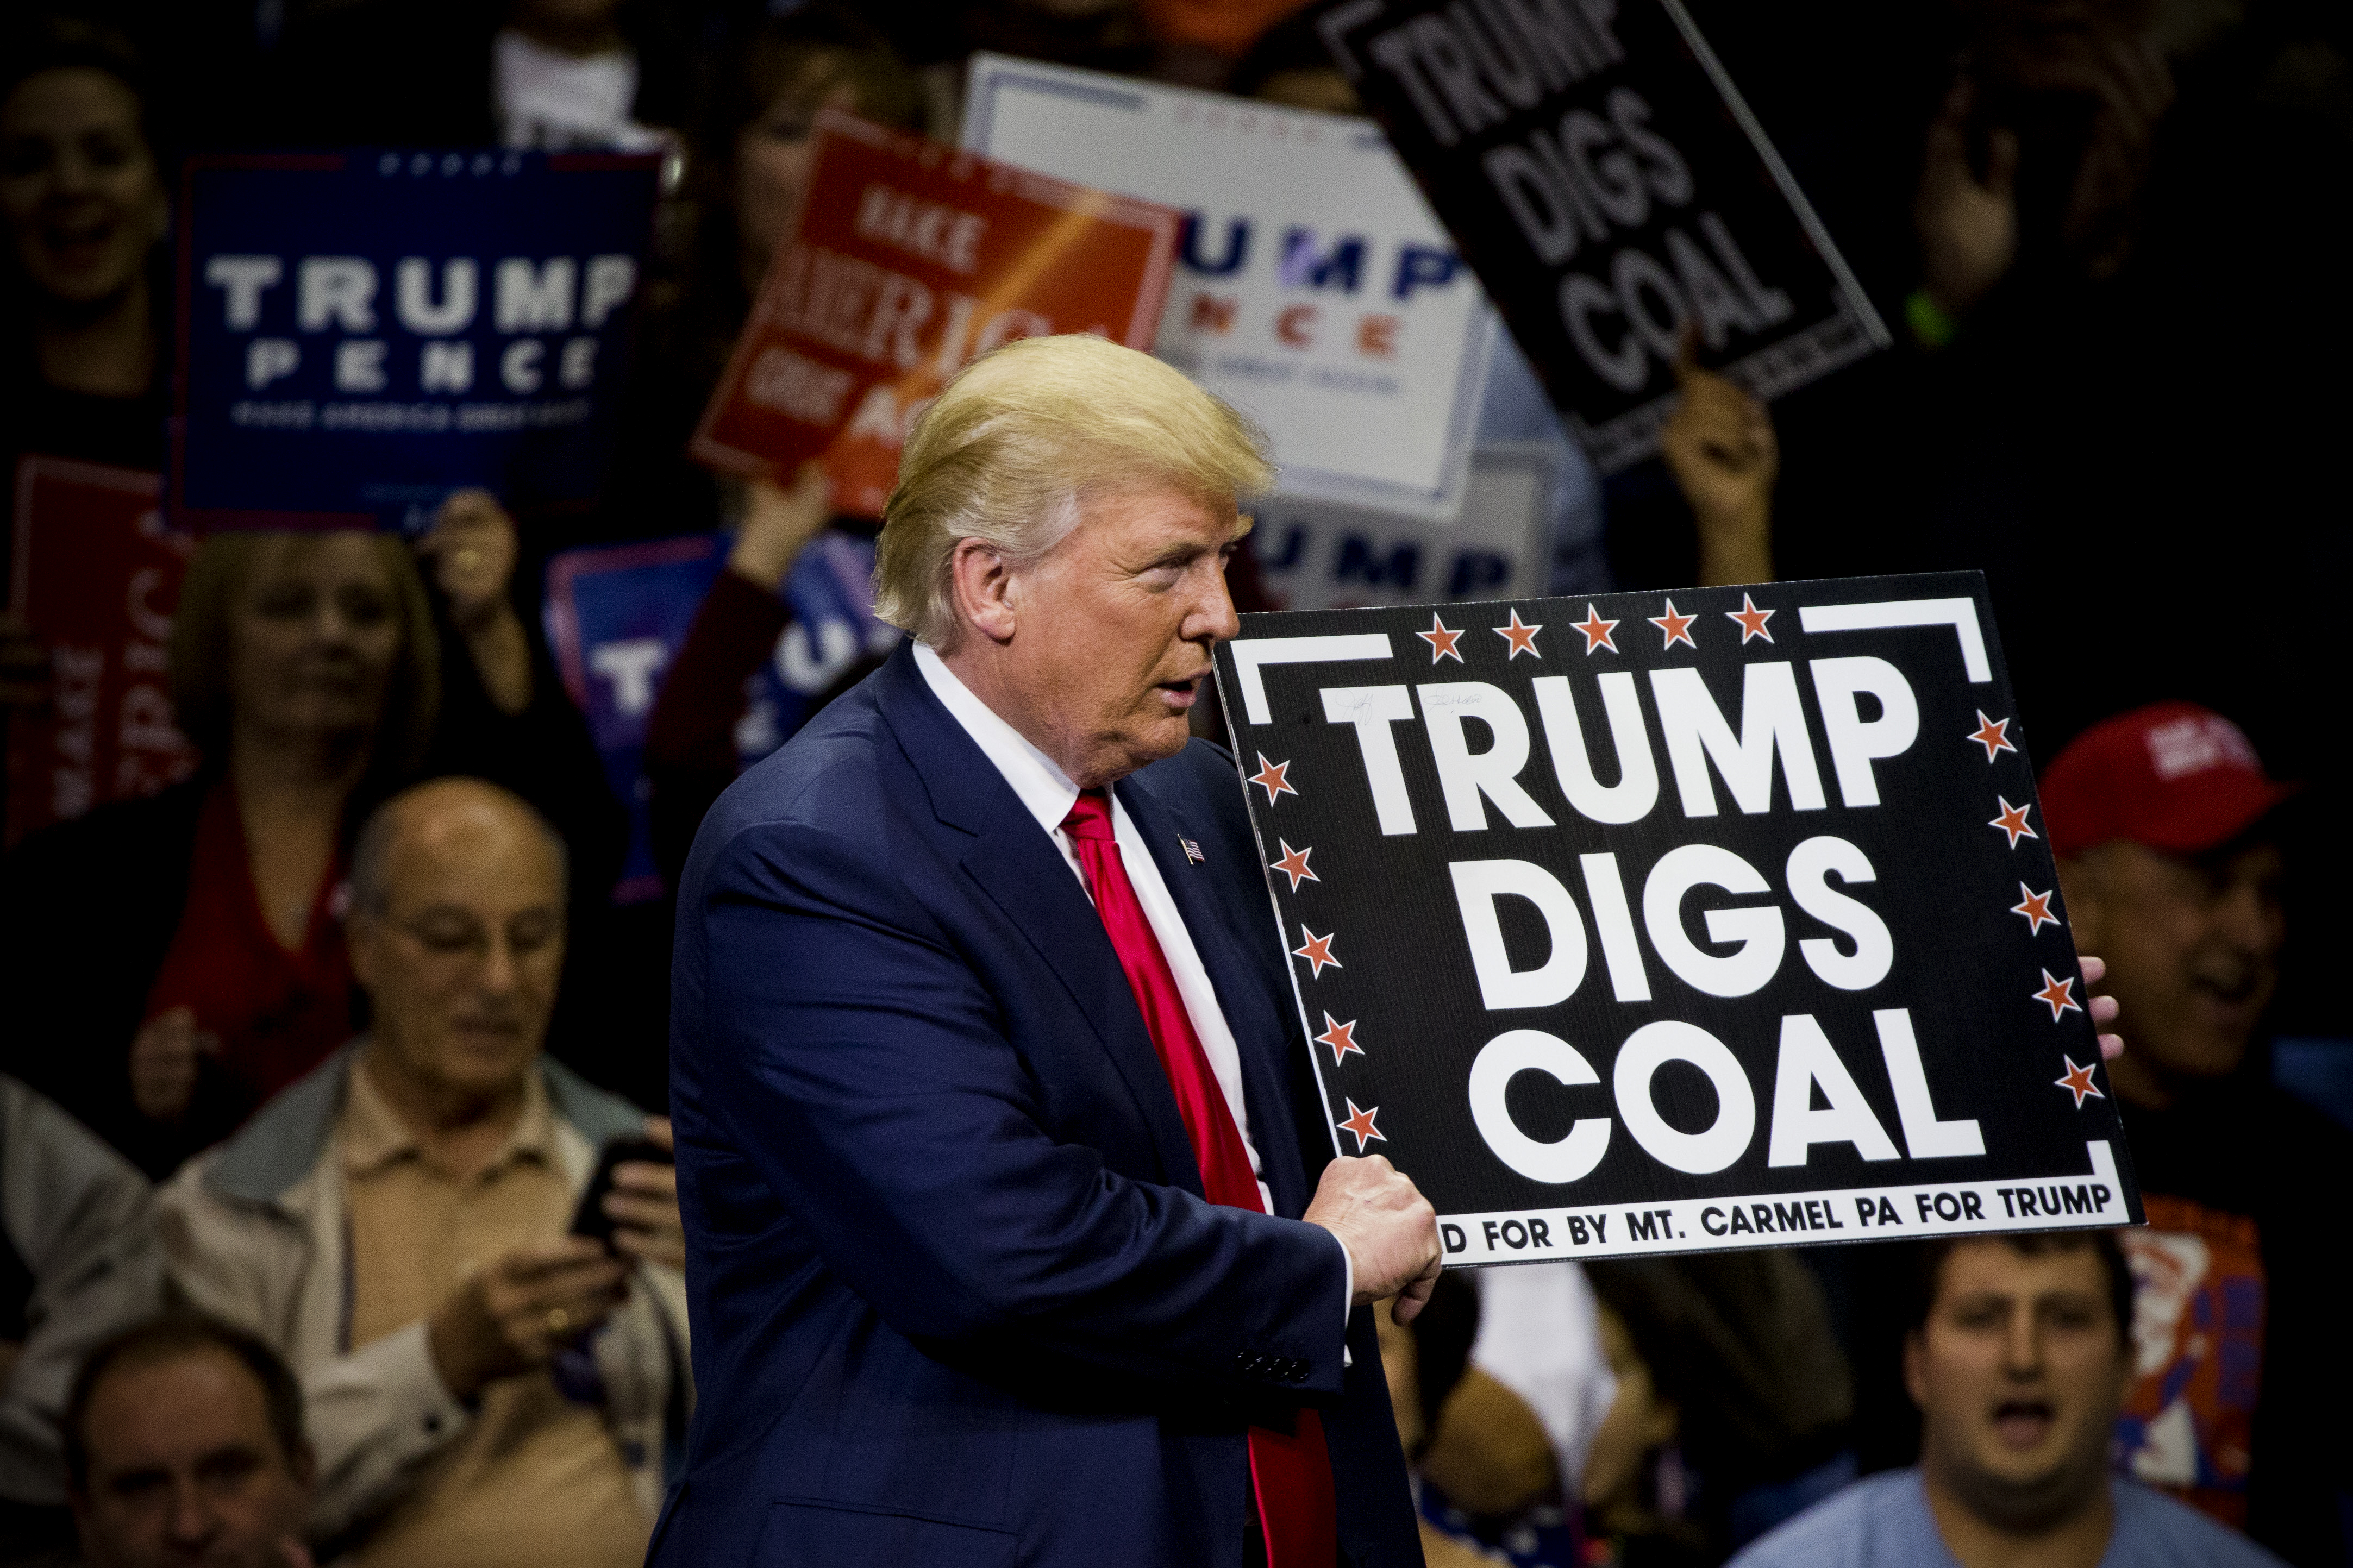 Donald Trump&nbsp;holds a sign supporting coal during a presidential campaign rally in Wilkes-Barre, Pennsylvania on October 10, 2016.